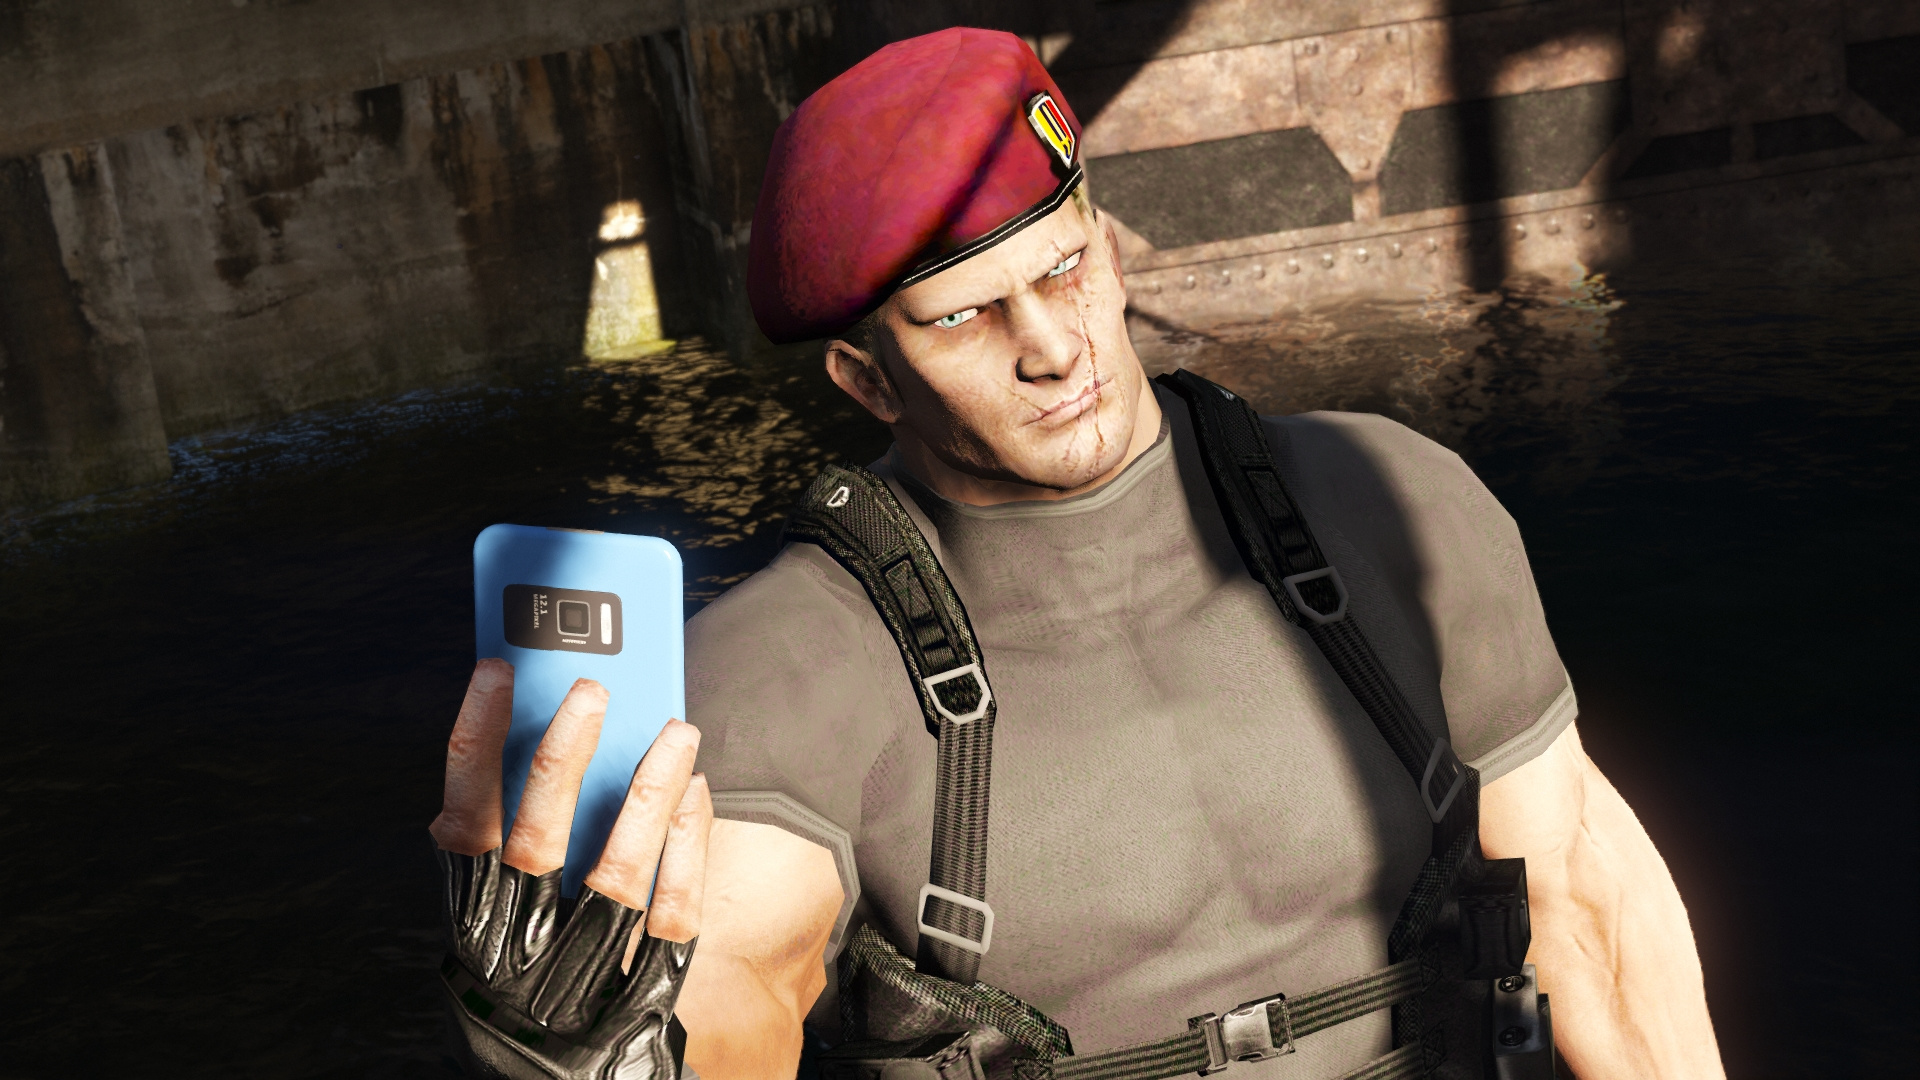 Jack Krauser - Resident Evil 4 HD version with classic outfit